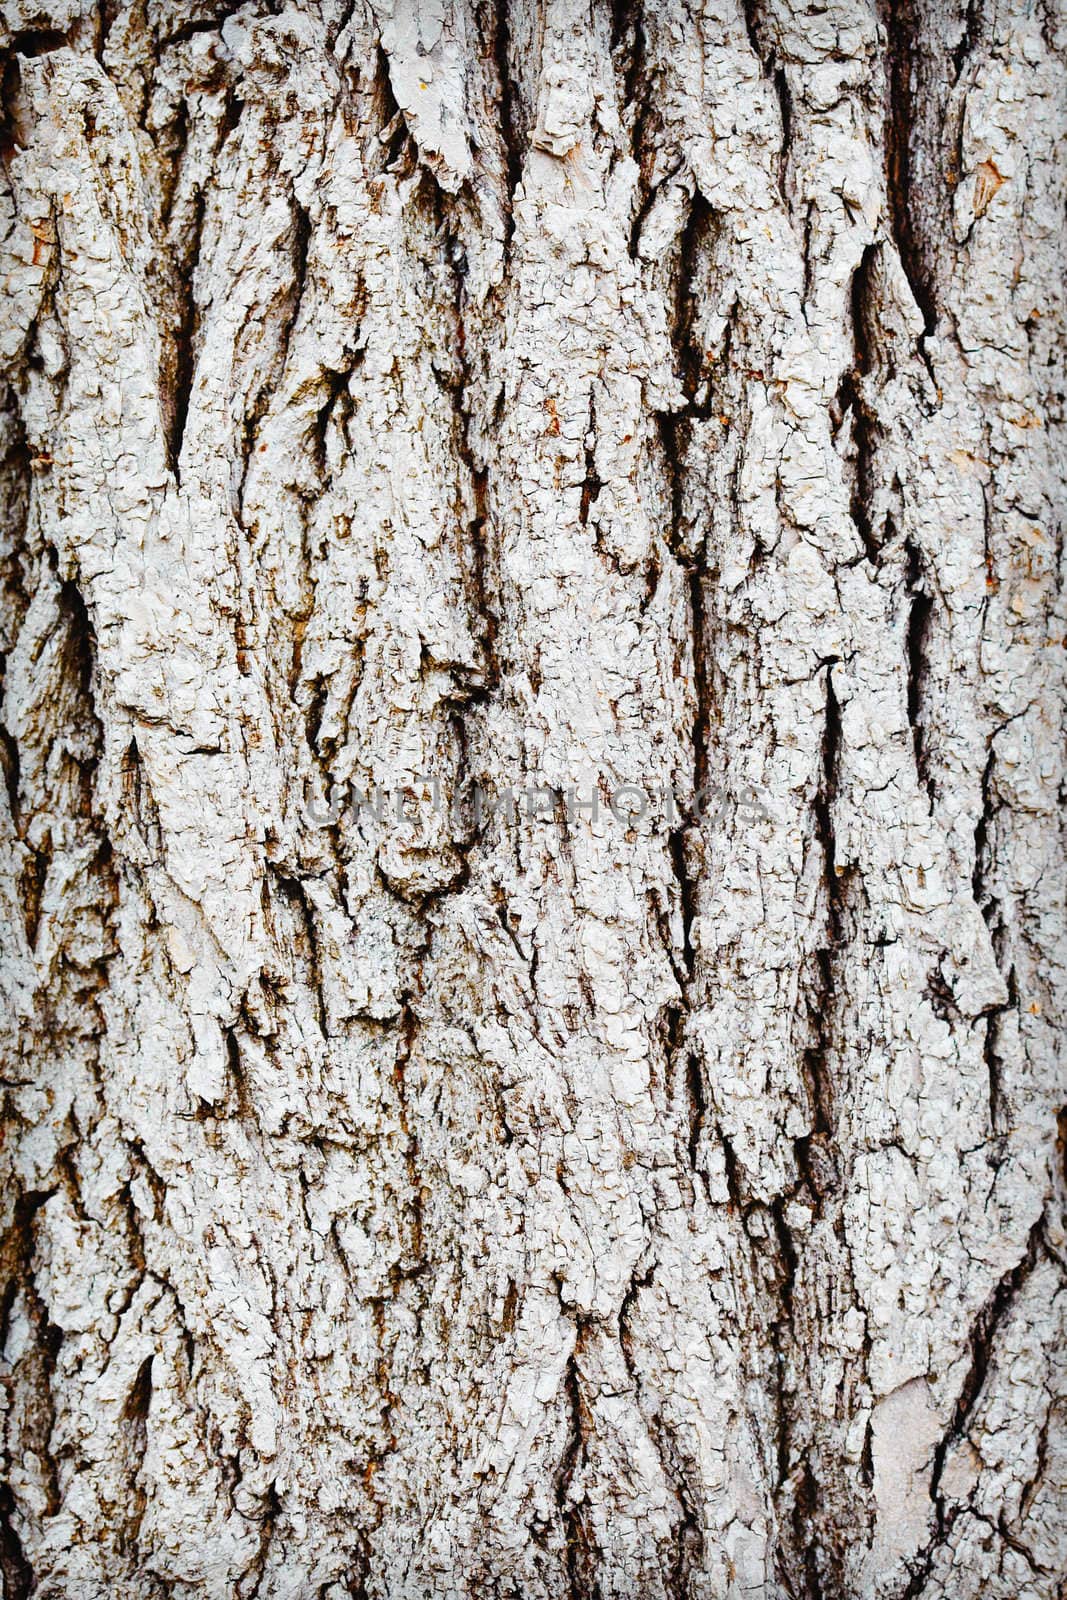 The trunk of old wood - rough gray bark